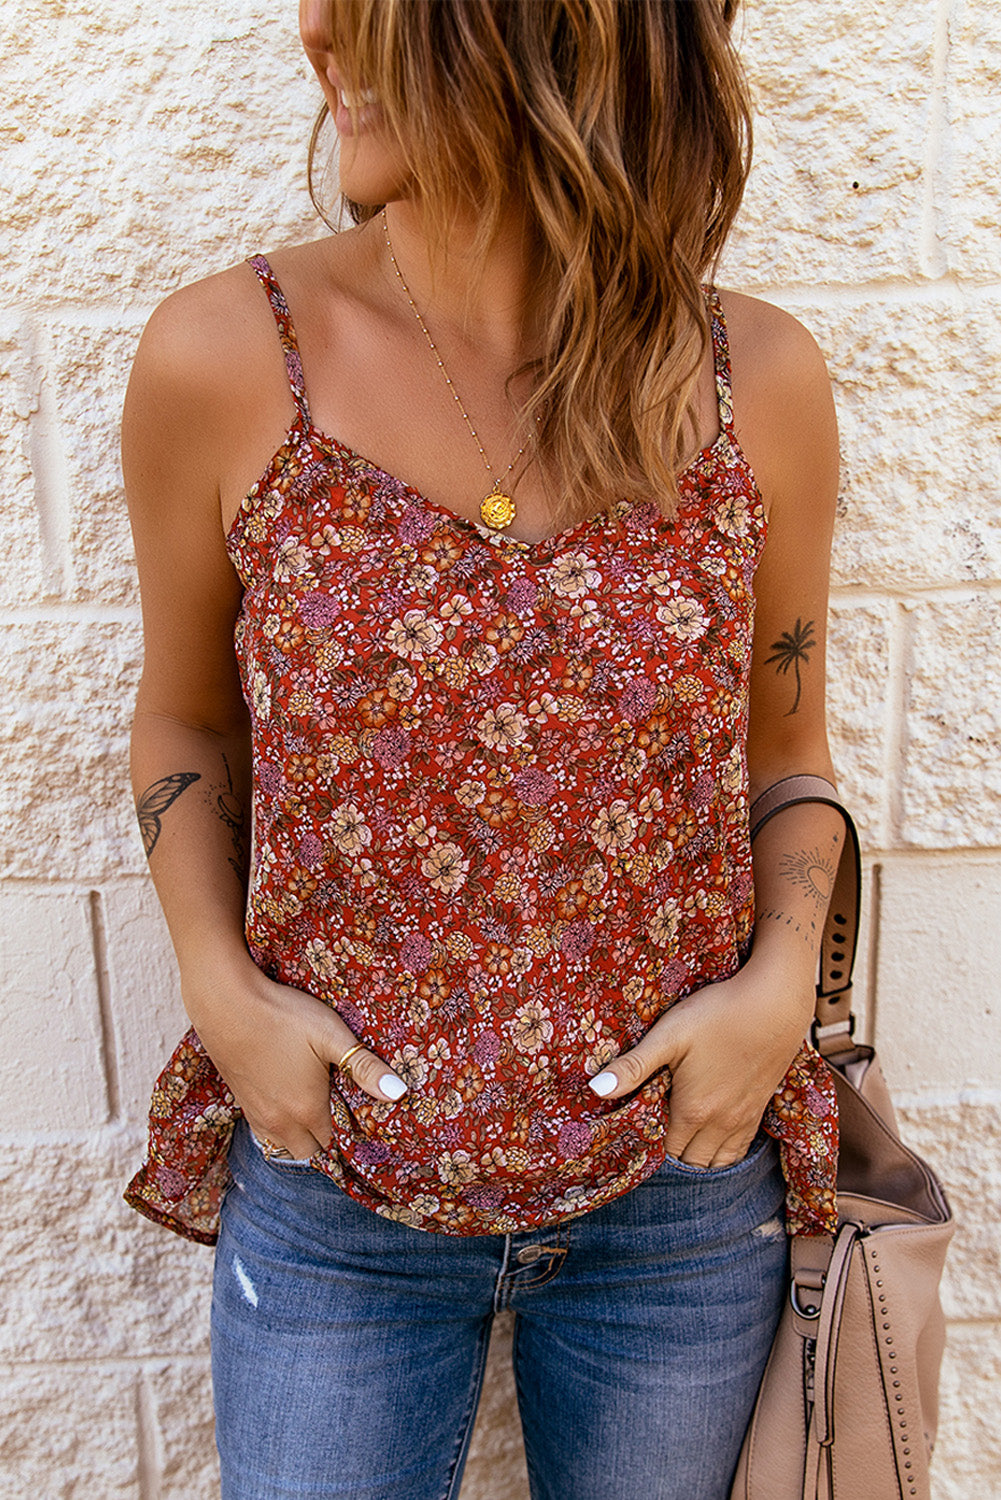 Fiery Red Floral Print Loose Spaghetti Strap Cami Top